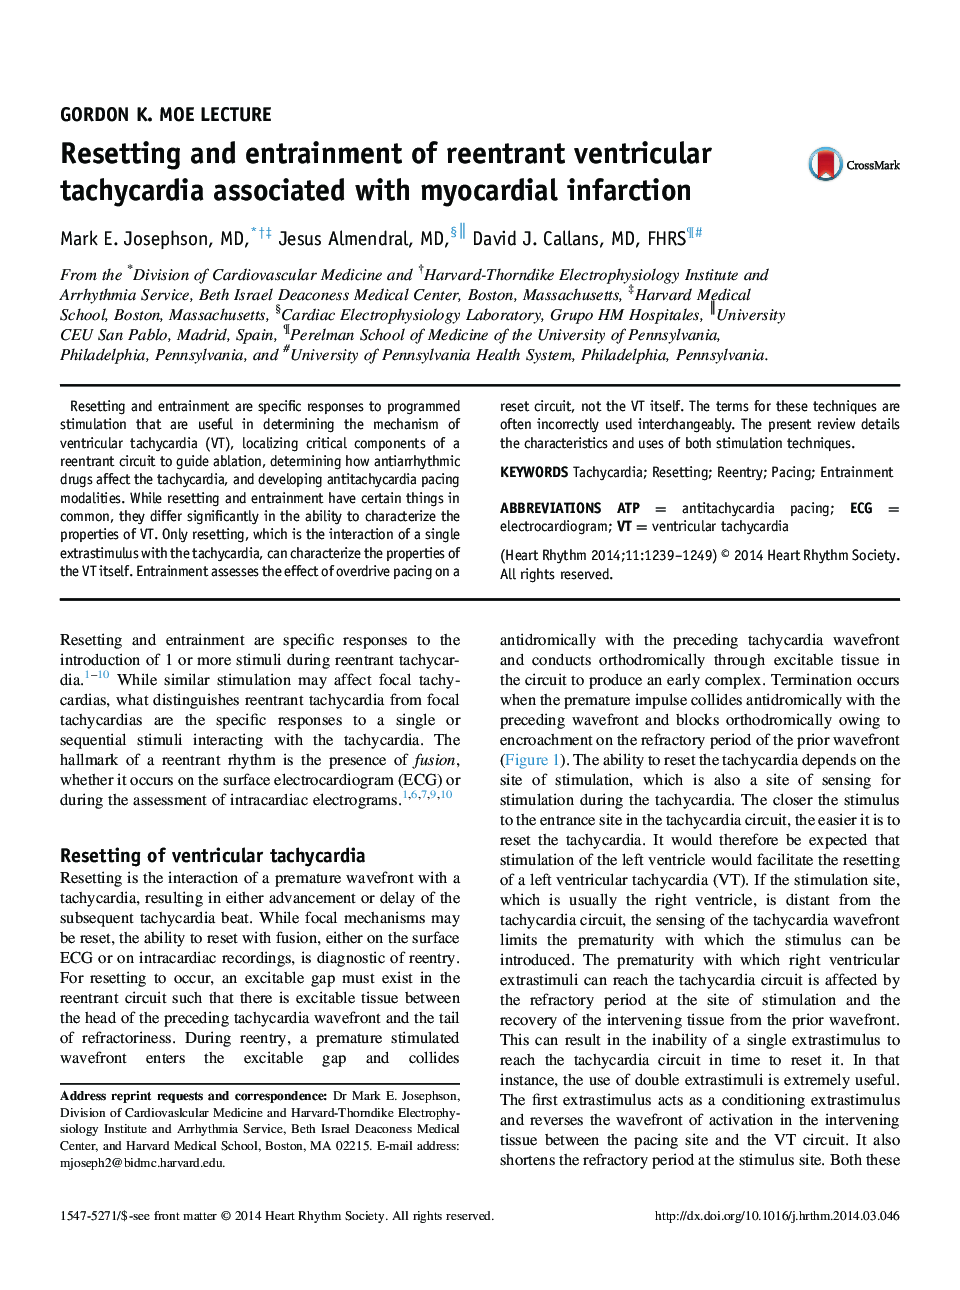 Resetting and entrainment of reentrant ventricular tachycardia associated with myocardial infarction